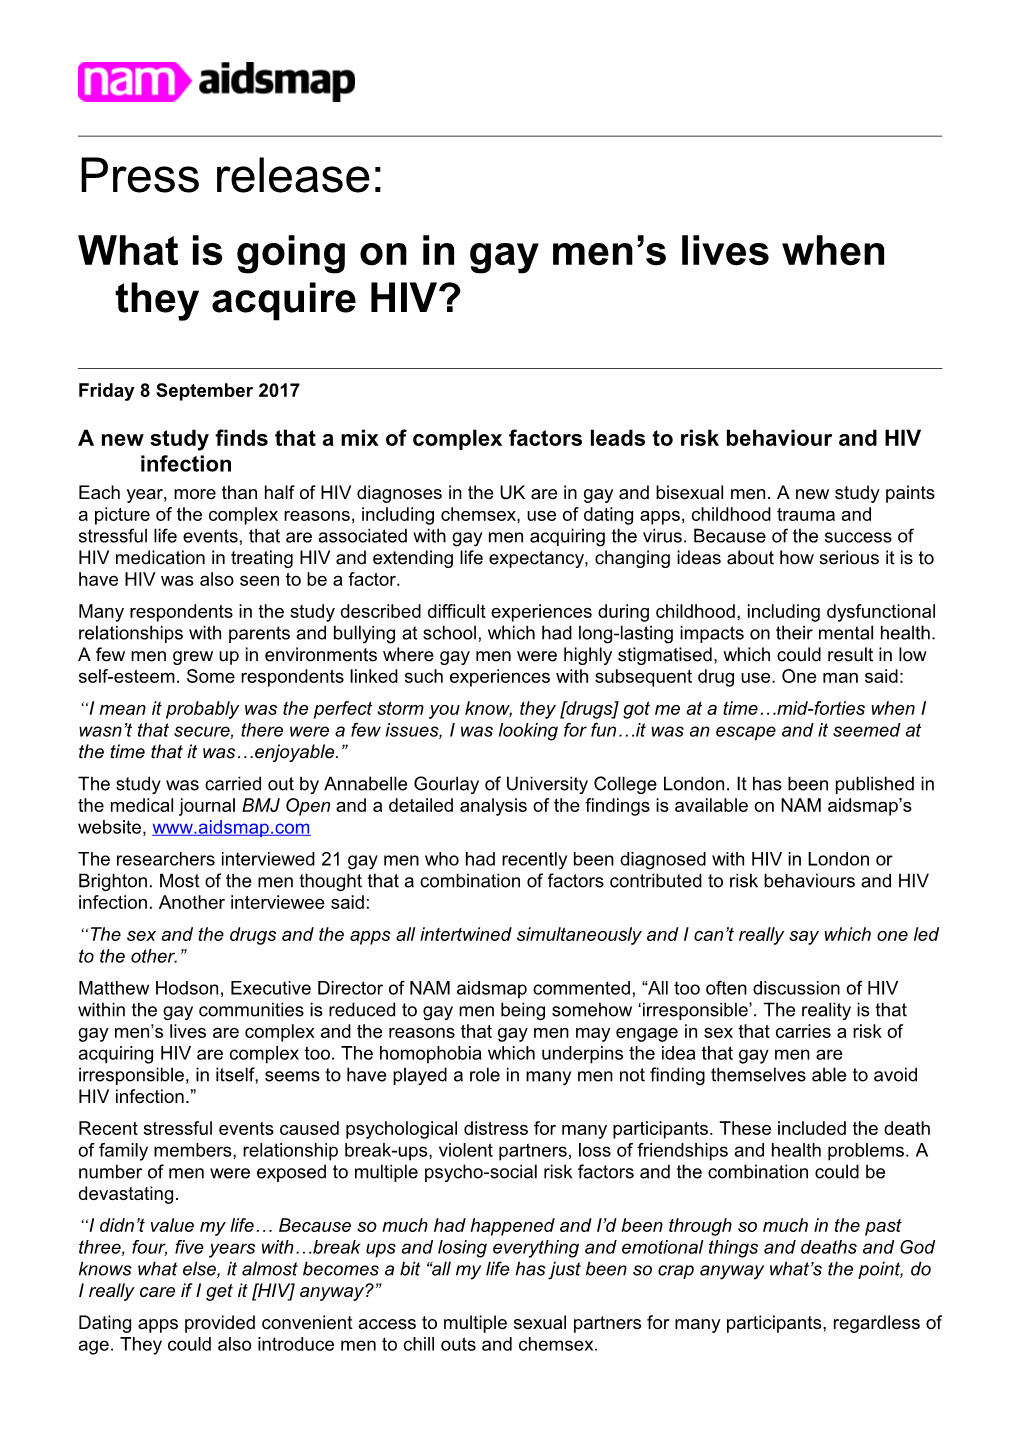 What Is Going on in Gay Men S Lives When They Acquire HIV?